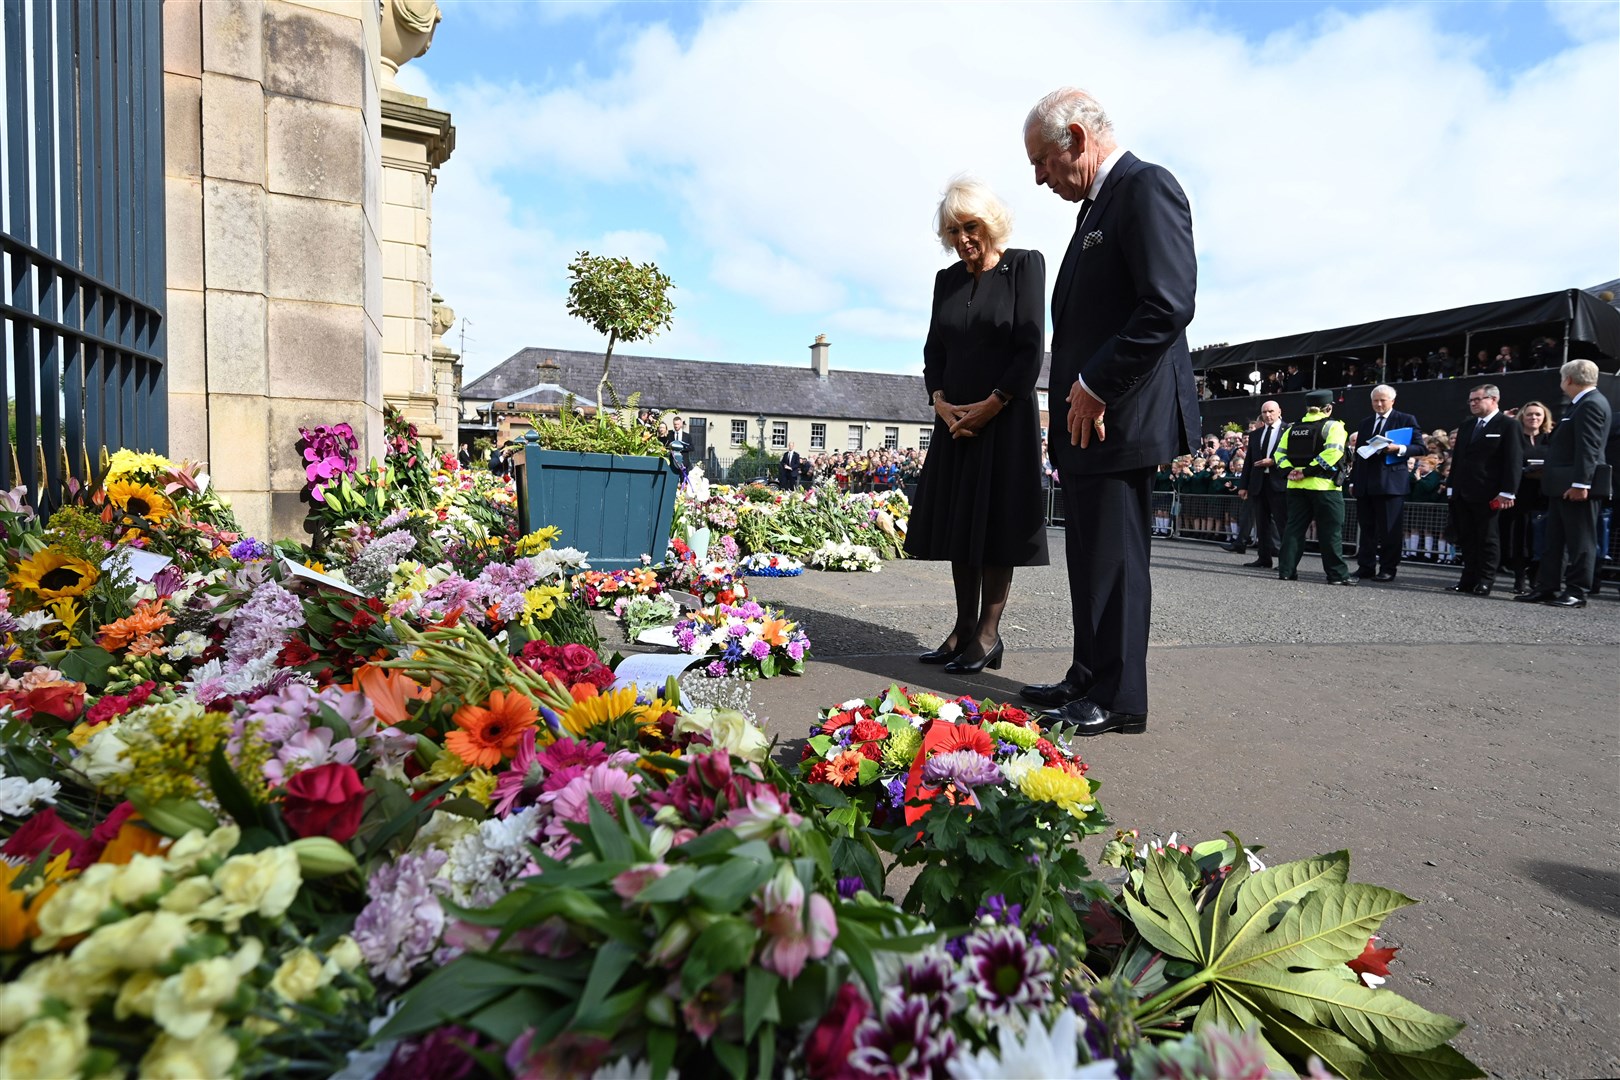 The King and Queen Consort were able to look at floral tributes left at Hillsborough Castle in Northern Ireland in the dry on Tuesday (Michael Cooper/PA)